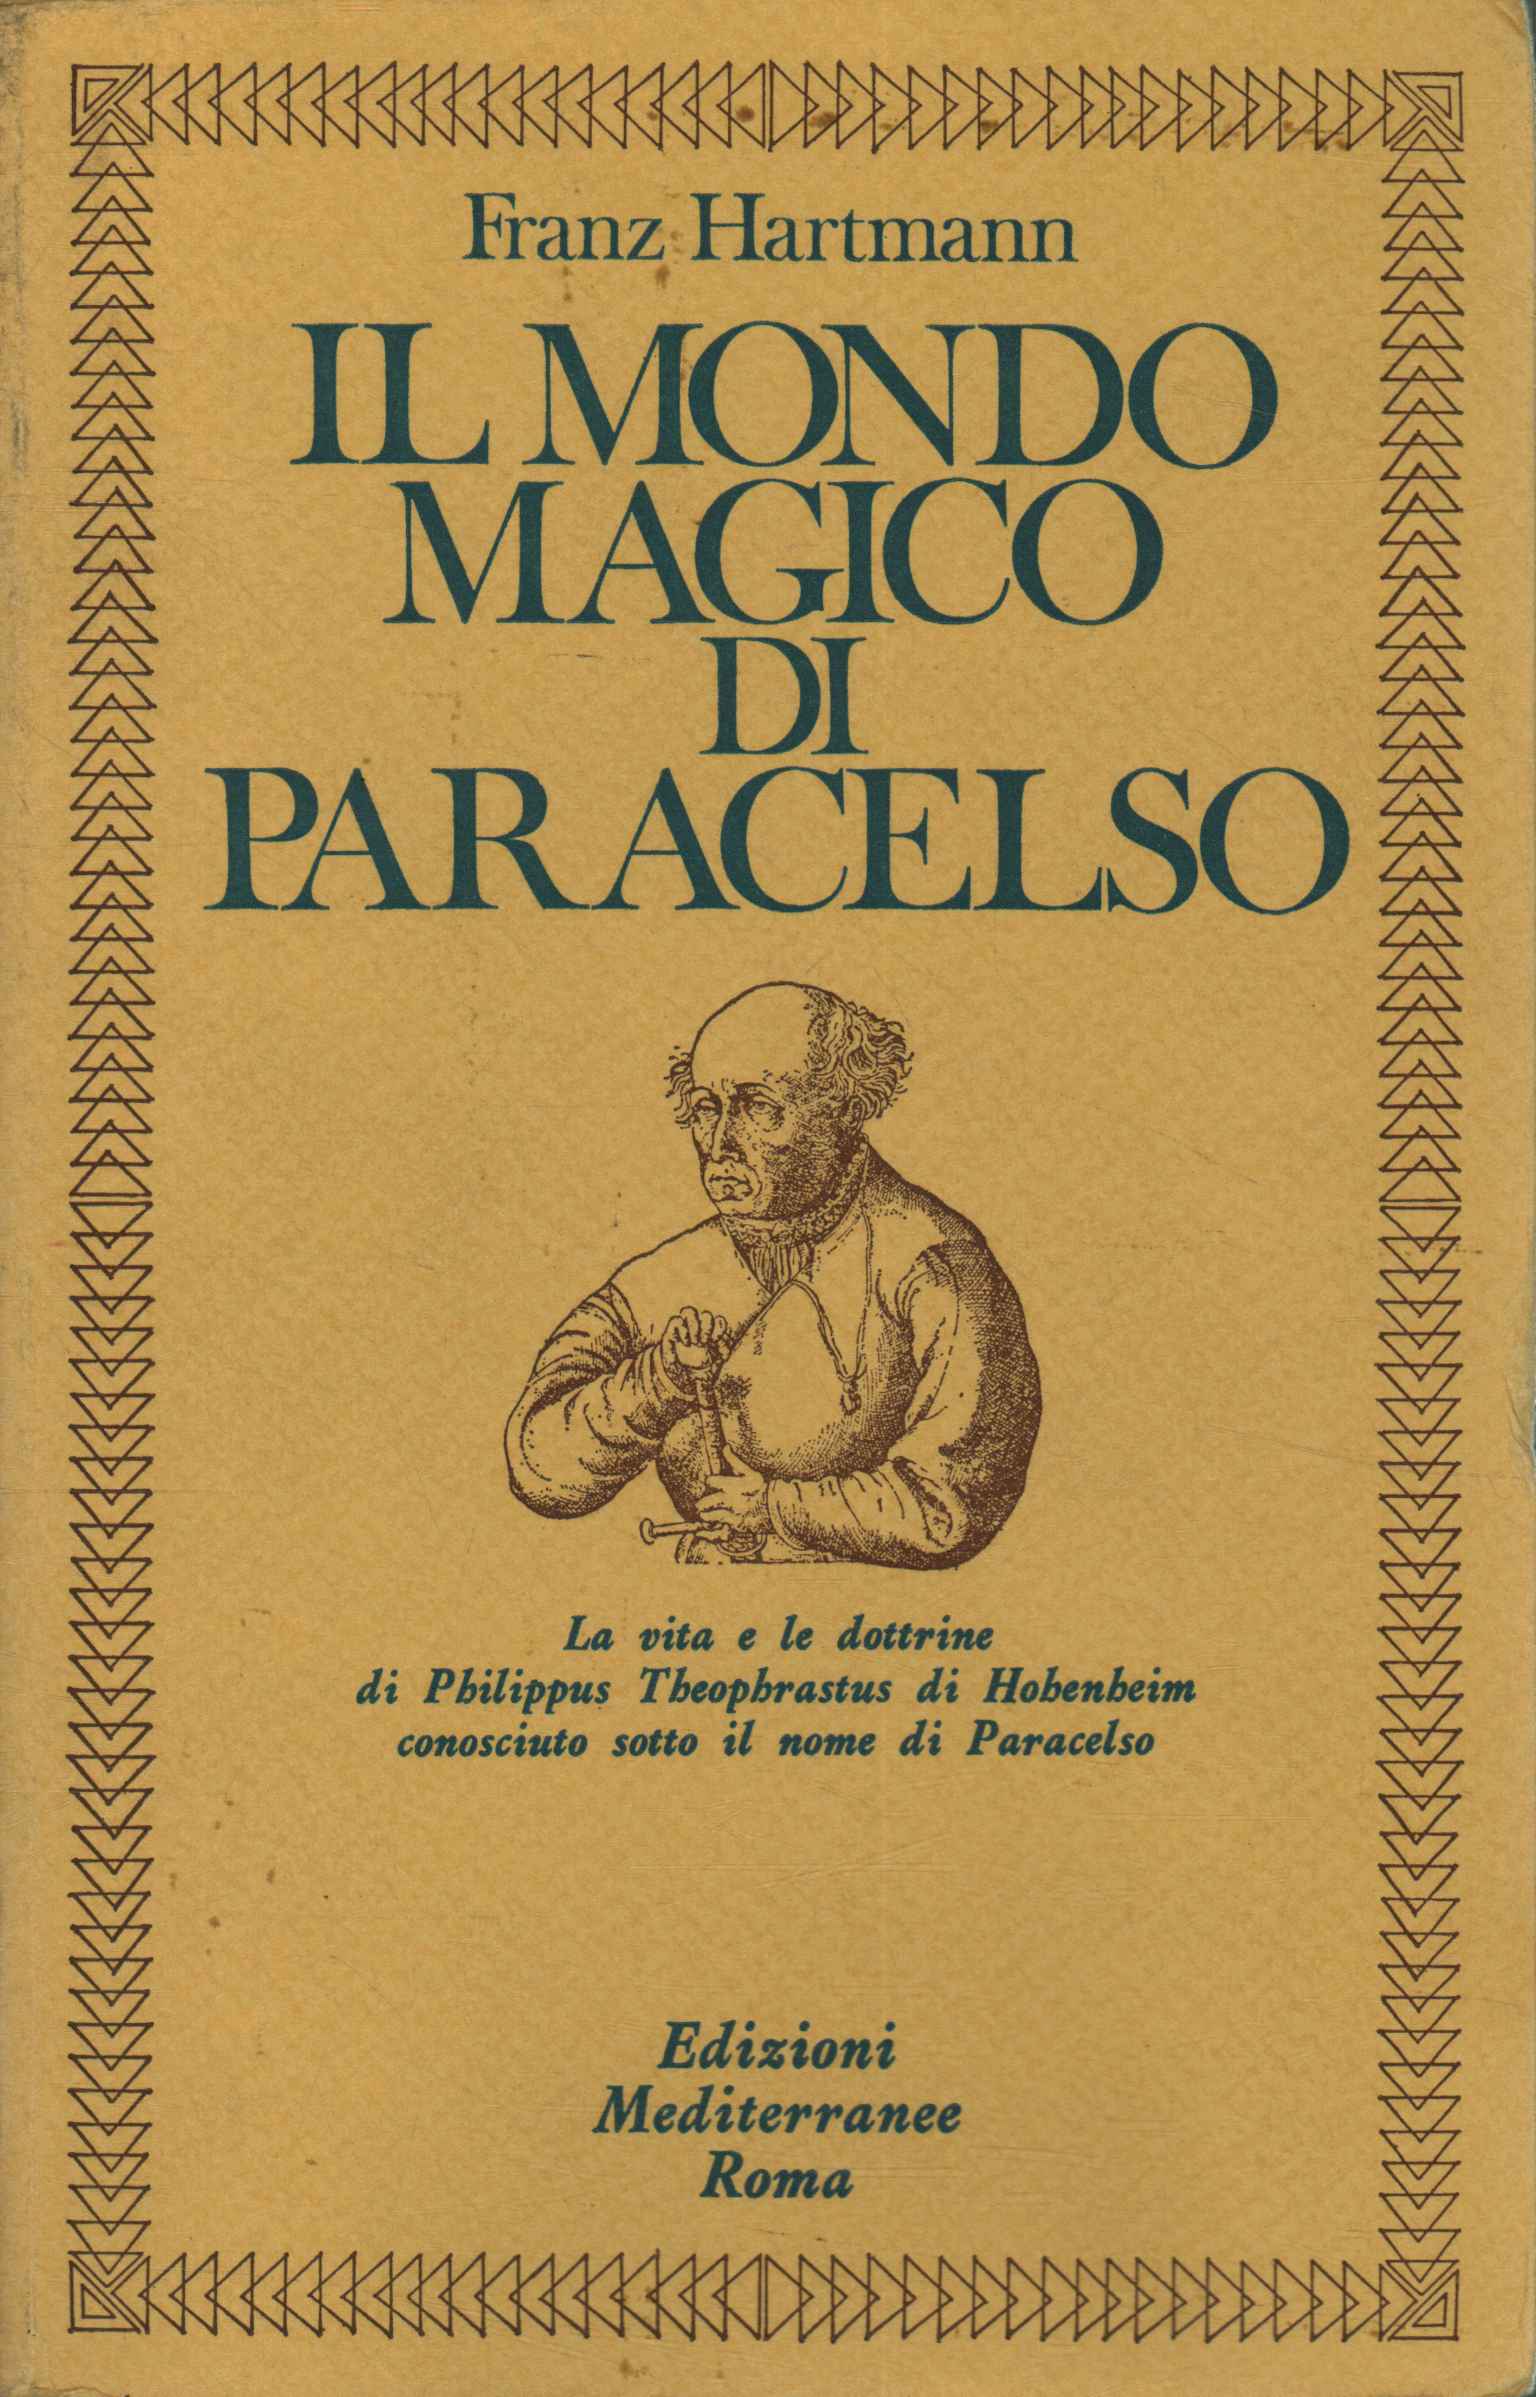 The magical world of Paracelsus